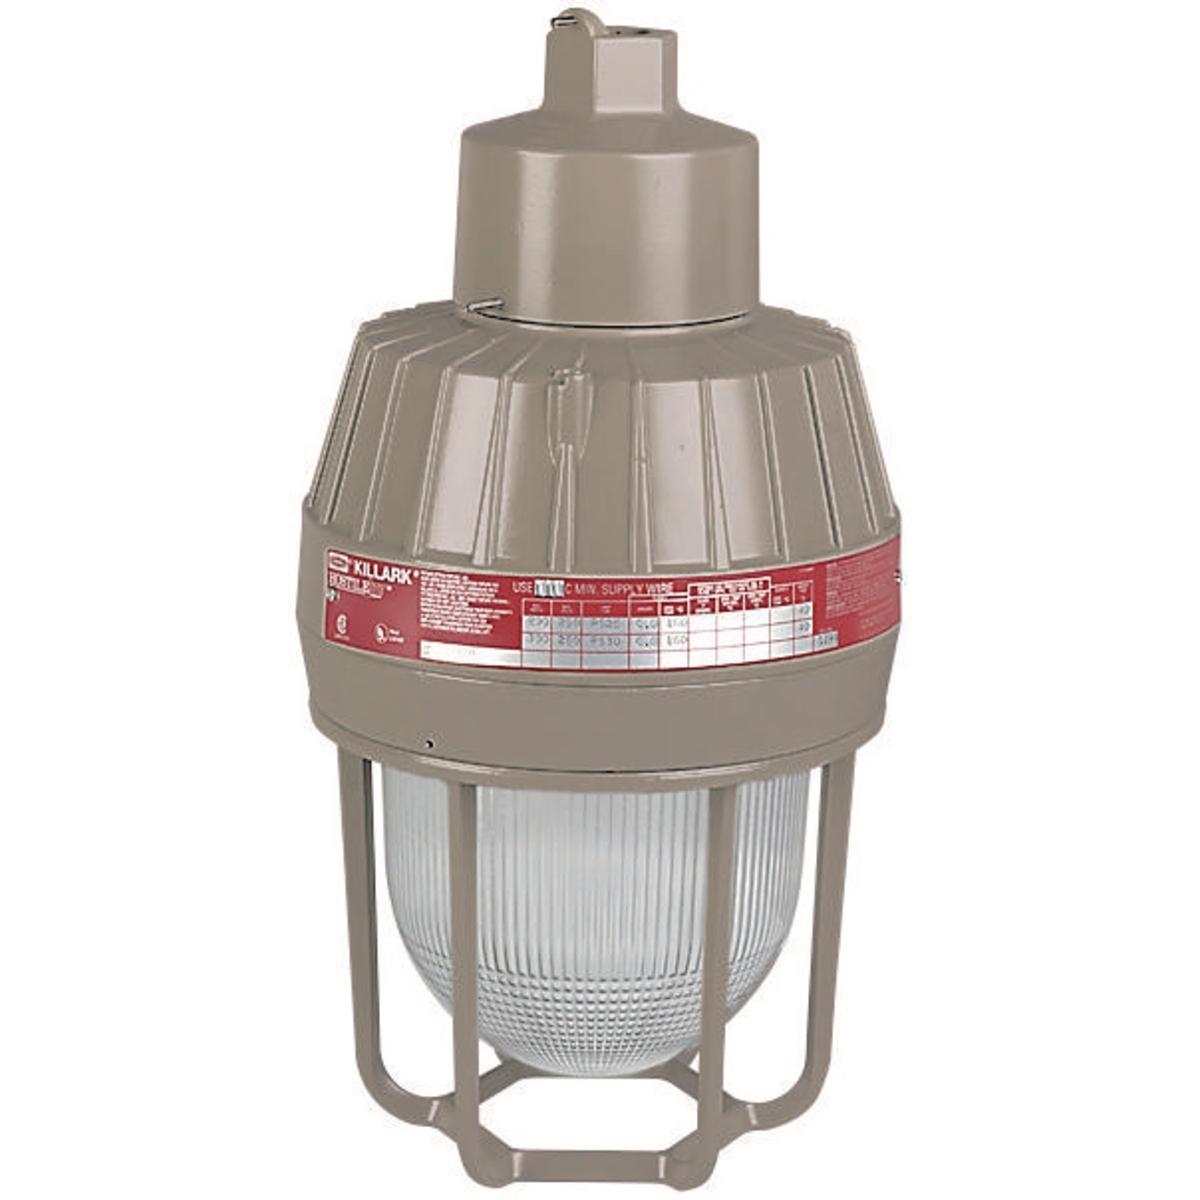 Hubbell EMI15A2G Incandescent 150W  3/4" Pendant with Guard  ; Four light sources—Incandescent, compact fluorescent, high pressure sodium and metal halide ; Mounting choice—Pendant, ceiling, 25˚ stanchion or 90˚ wall mount, all with “wireless” design that allows fast, eas